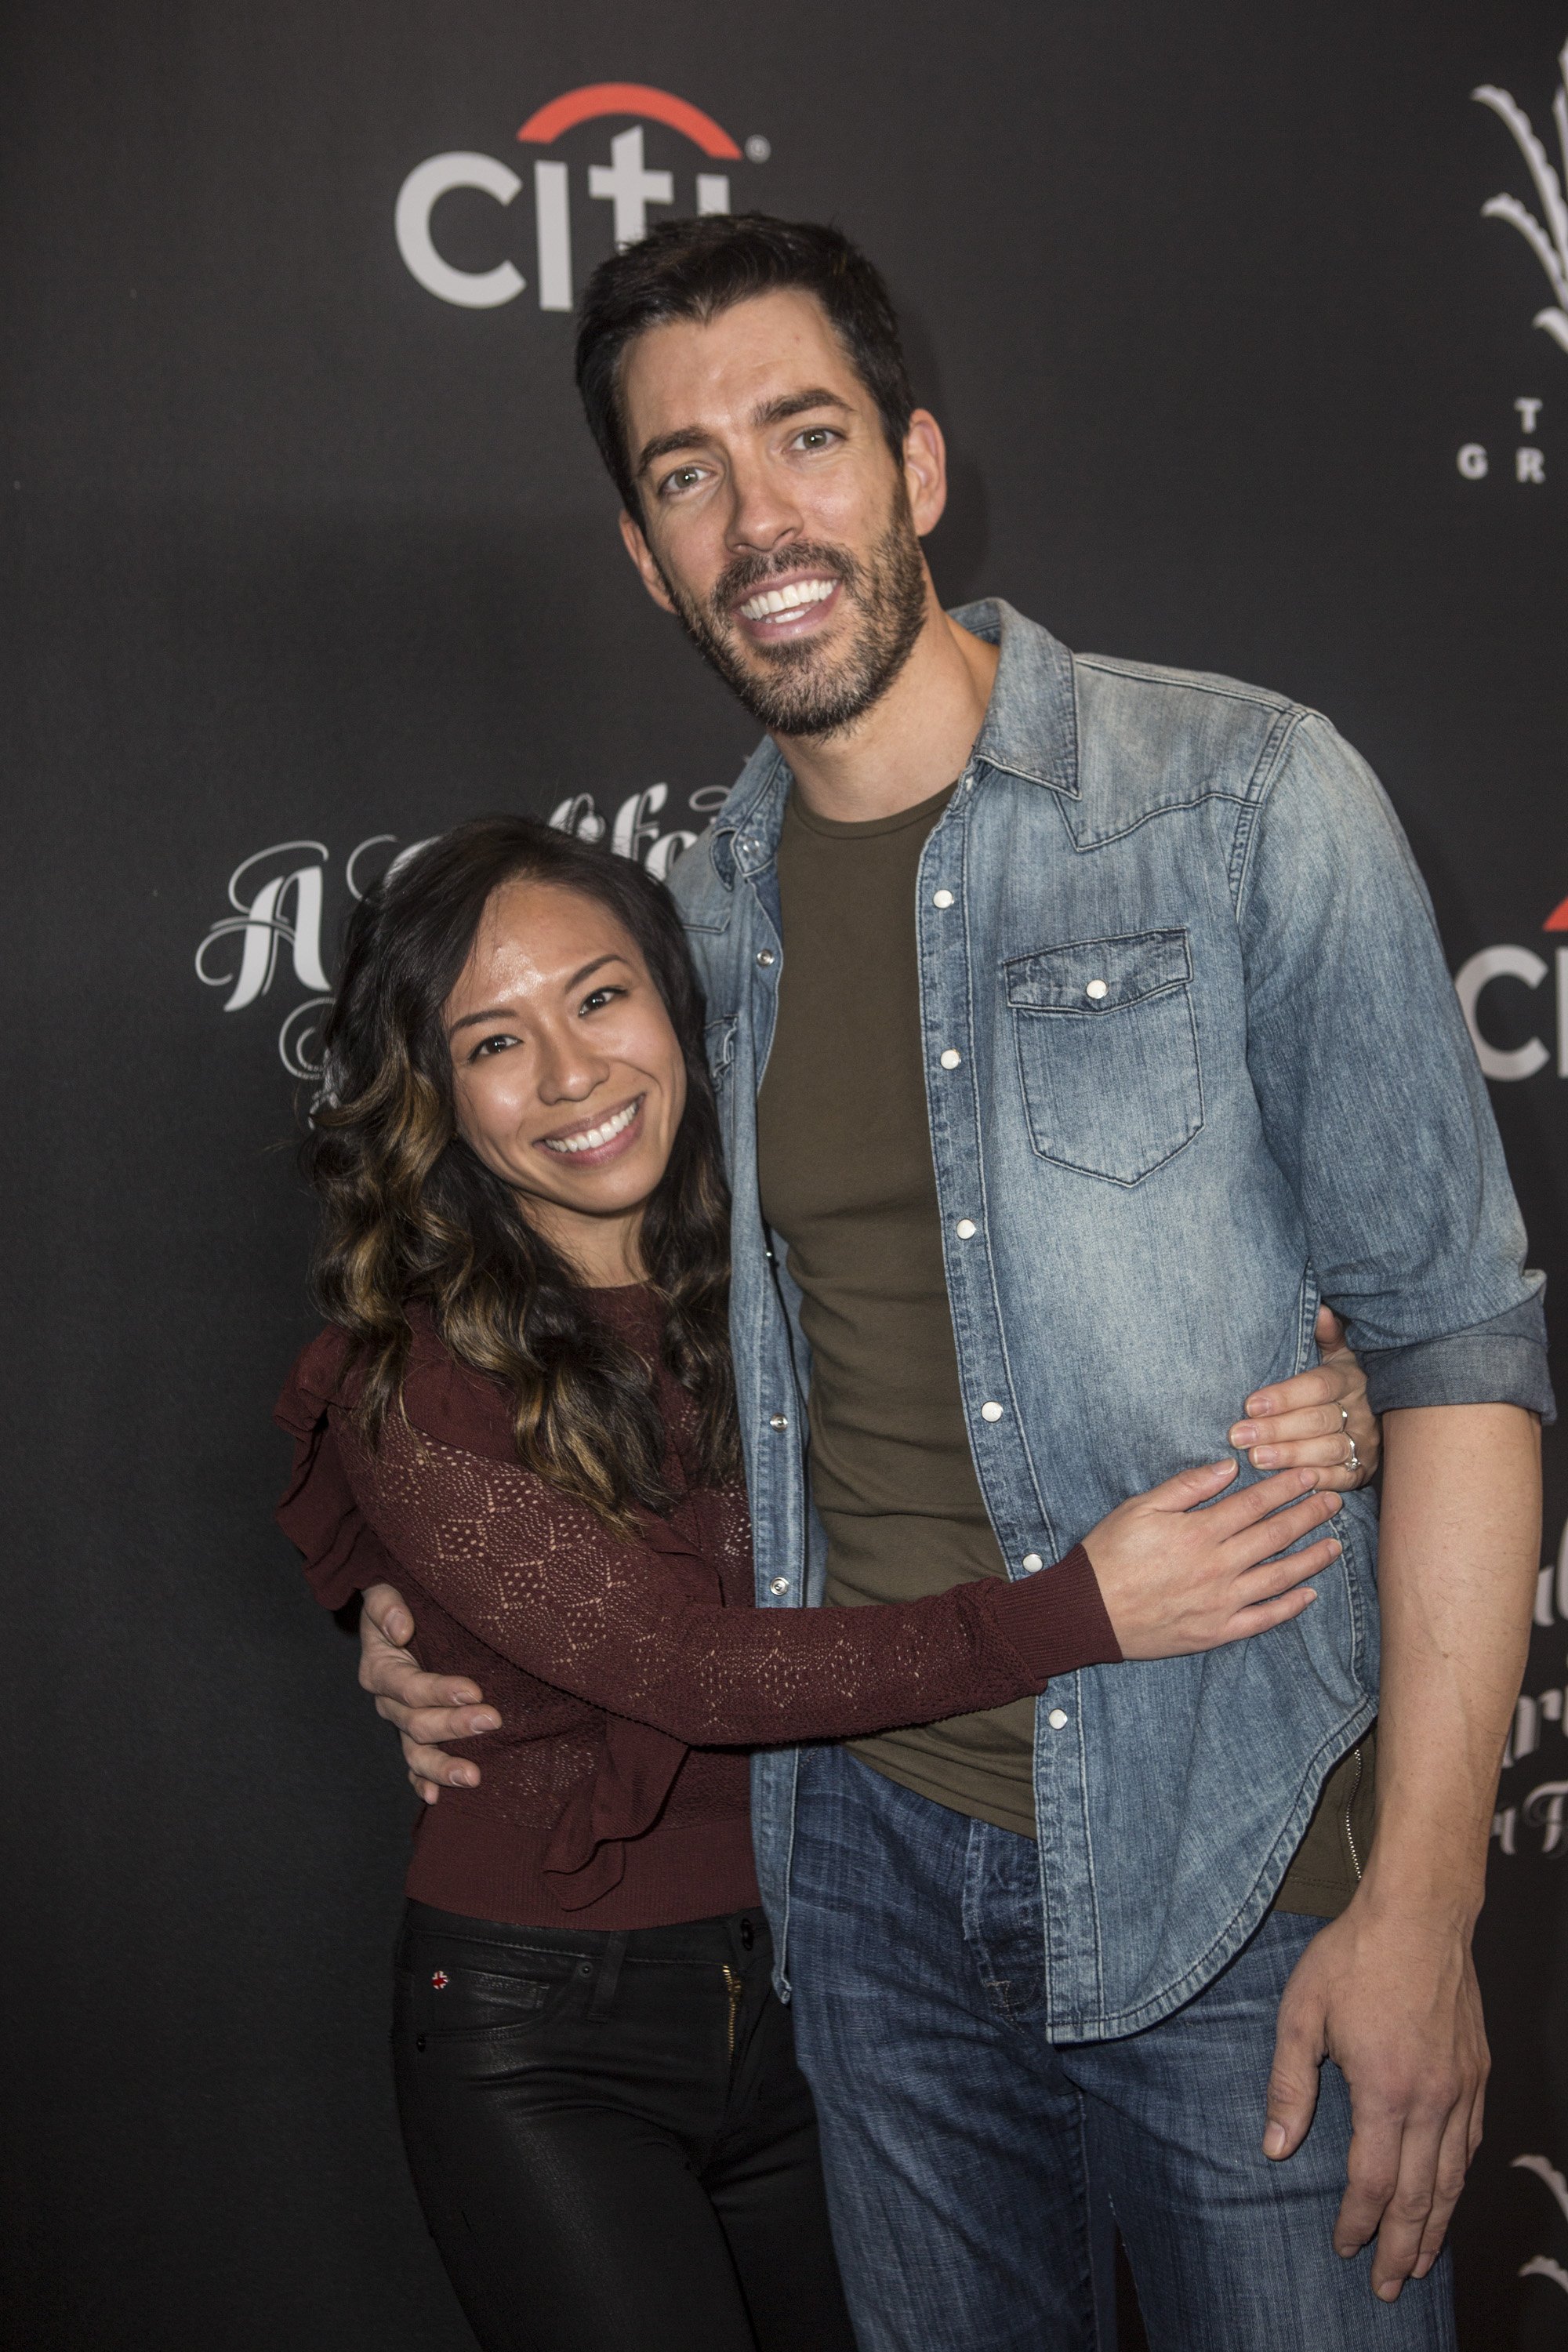 Linda Phan and Drew Scott at the California Christmas on November 12, 2017, in Los Angeles, California. | Source: Harmony Gerber/WireImage/Getty Images